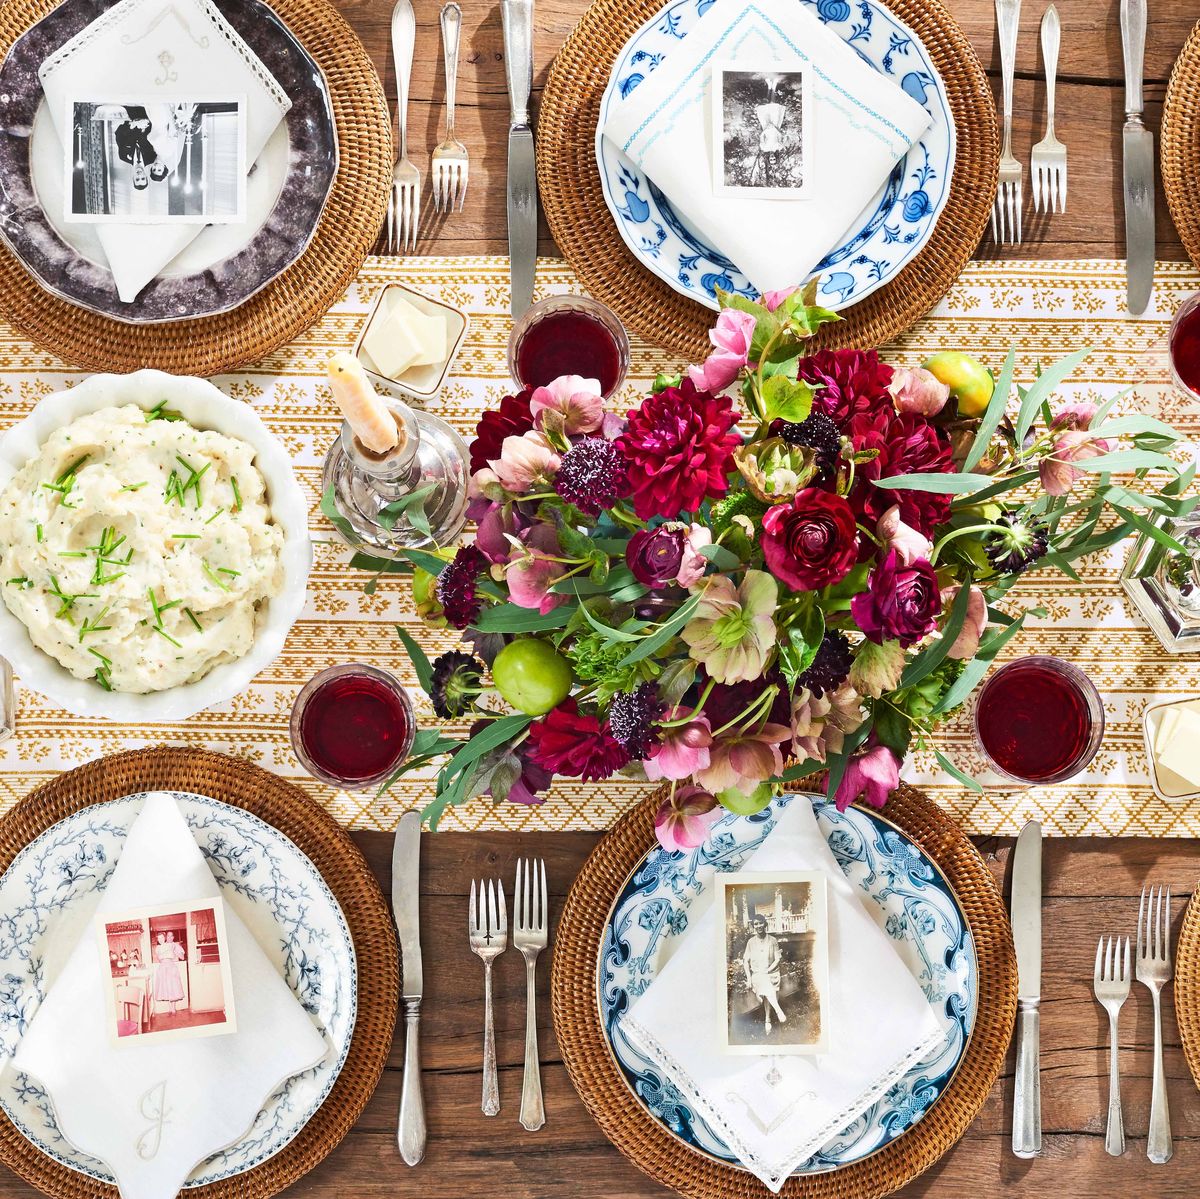 Thanksgiving Table Setting Ideas for a Big Crowd - The New York Times